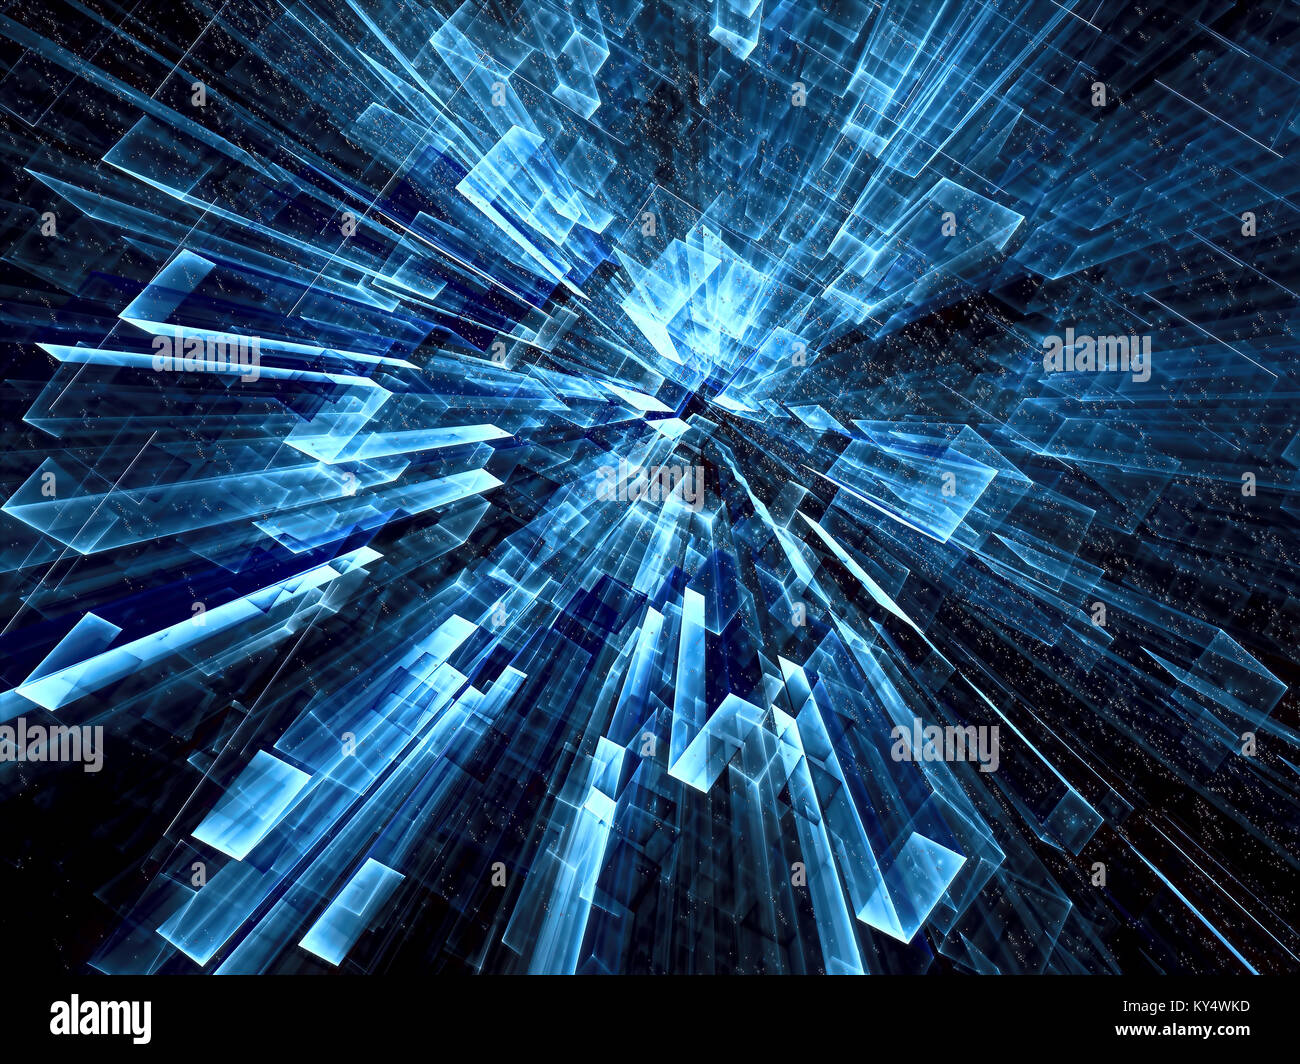 Dark blue background - abstract computer-generated image. Digital art - perspective, light effects and glowing dots. For virtual reality, tech industr Stock Photo